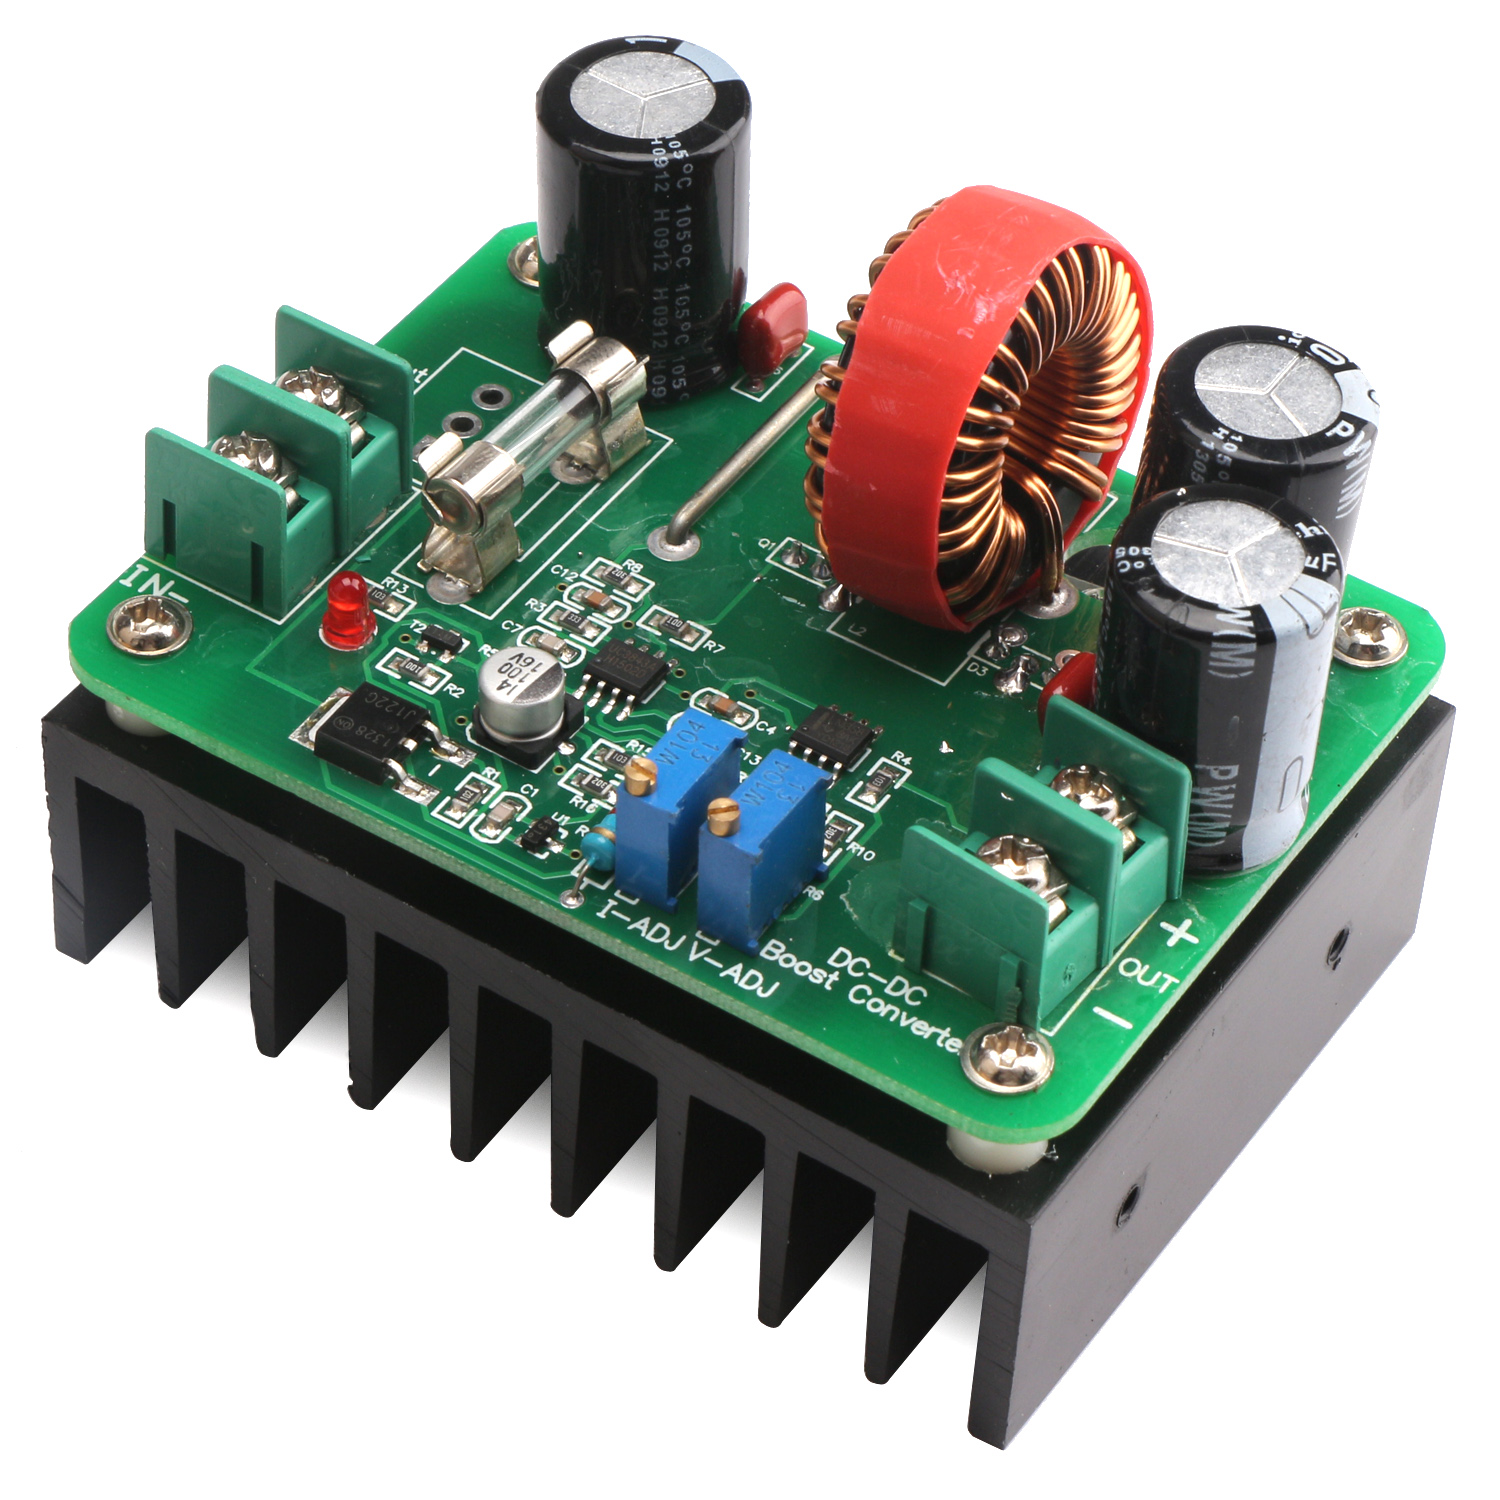 Dasiter 600W High Power DC to DC Boost Converter DC 12-60V to 12-80V Boost Module Board Step-up Transformer 